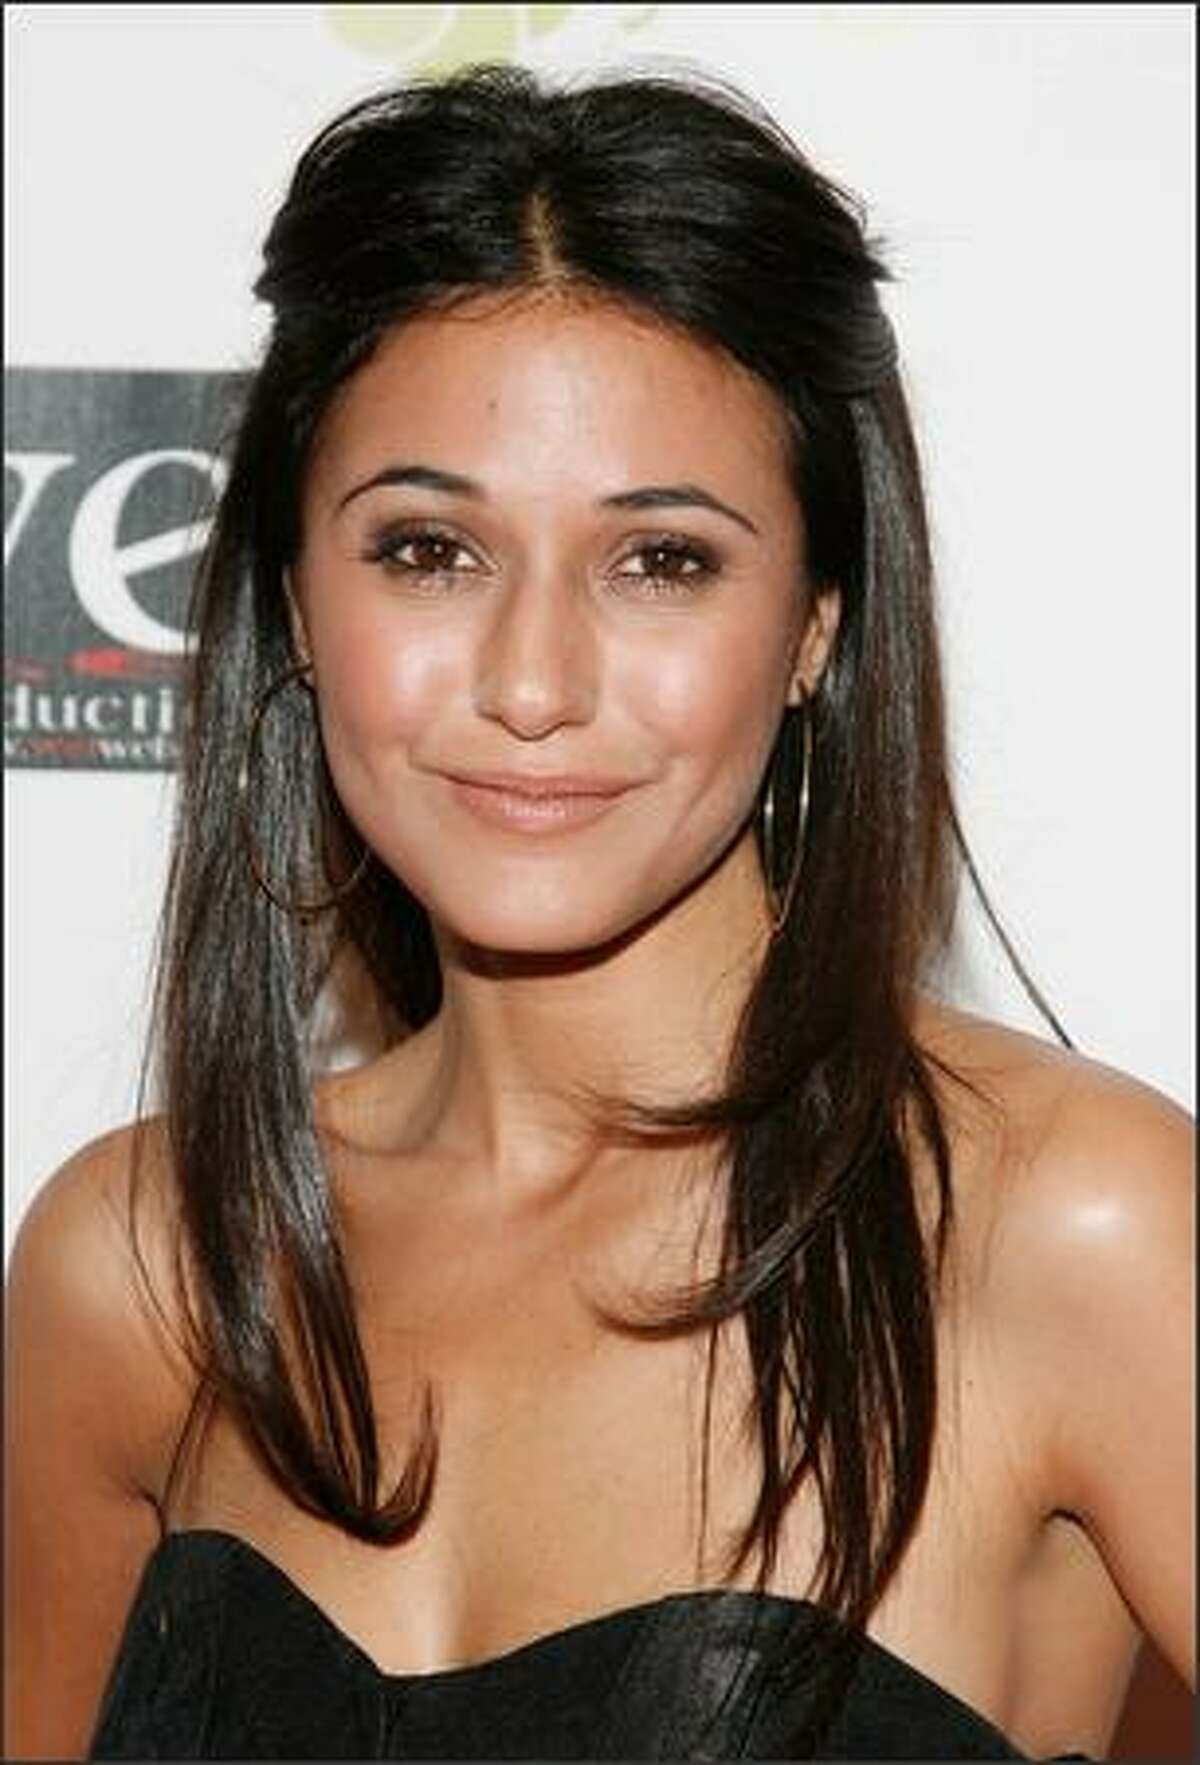 Actress Emmanuelle Chriqui attends the LOVE benefit to support WET's 10th season at the Angel Orensanz Foundation in New York City.